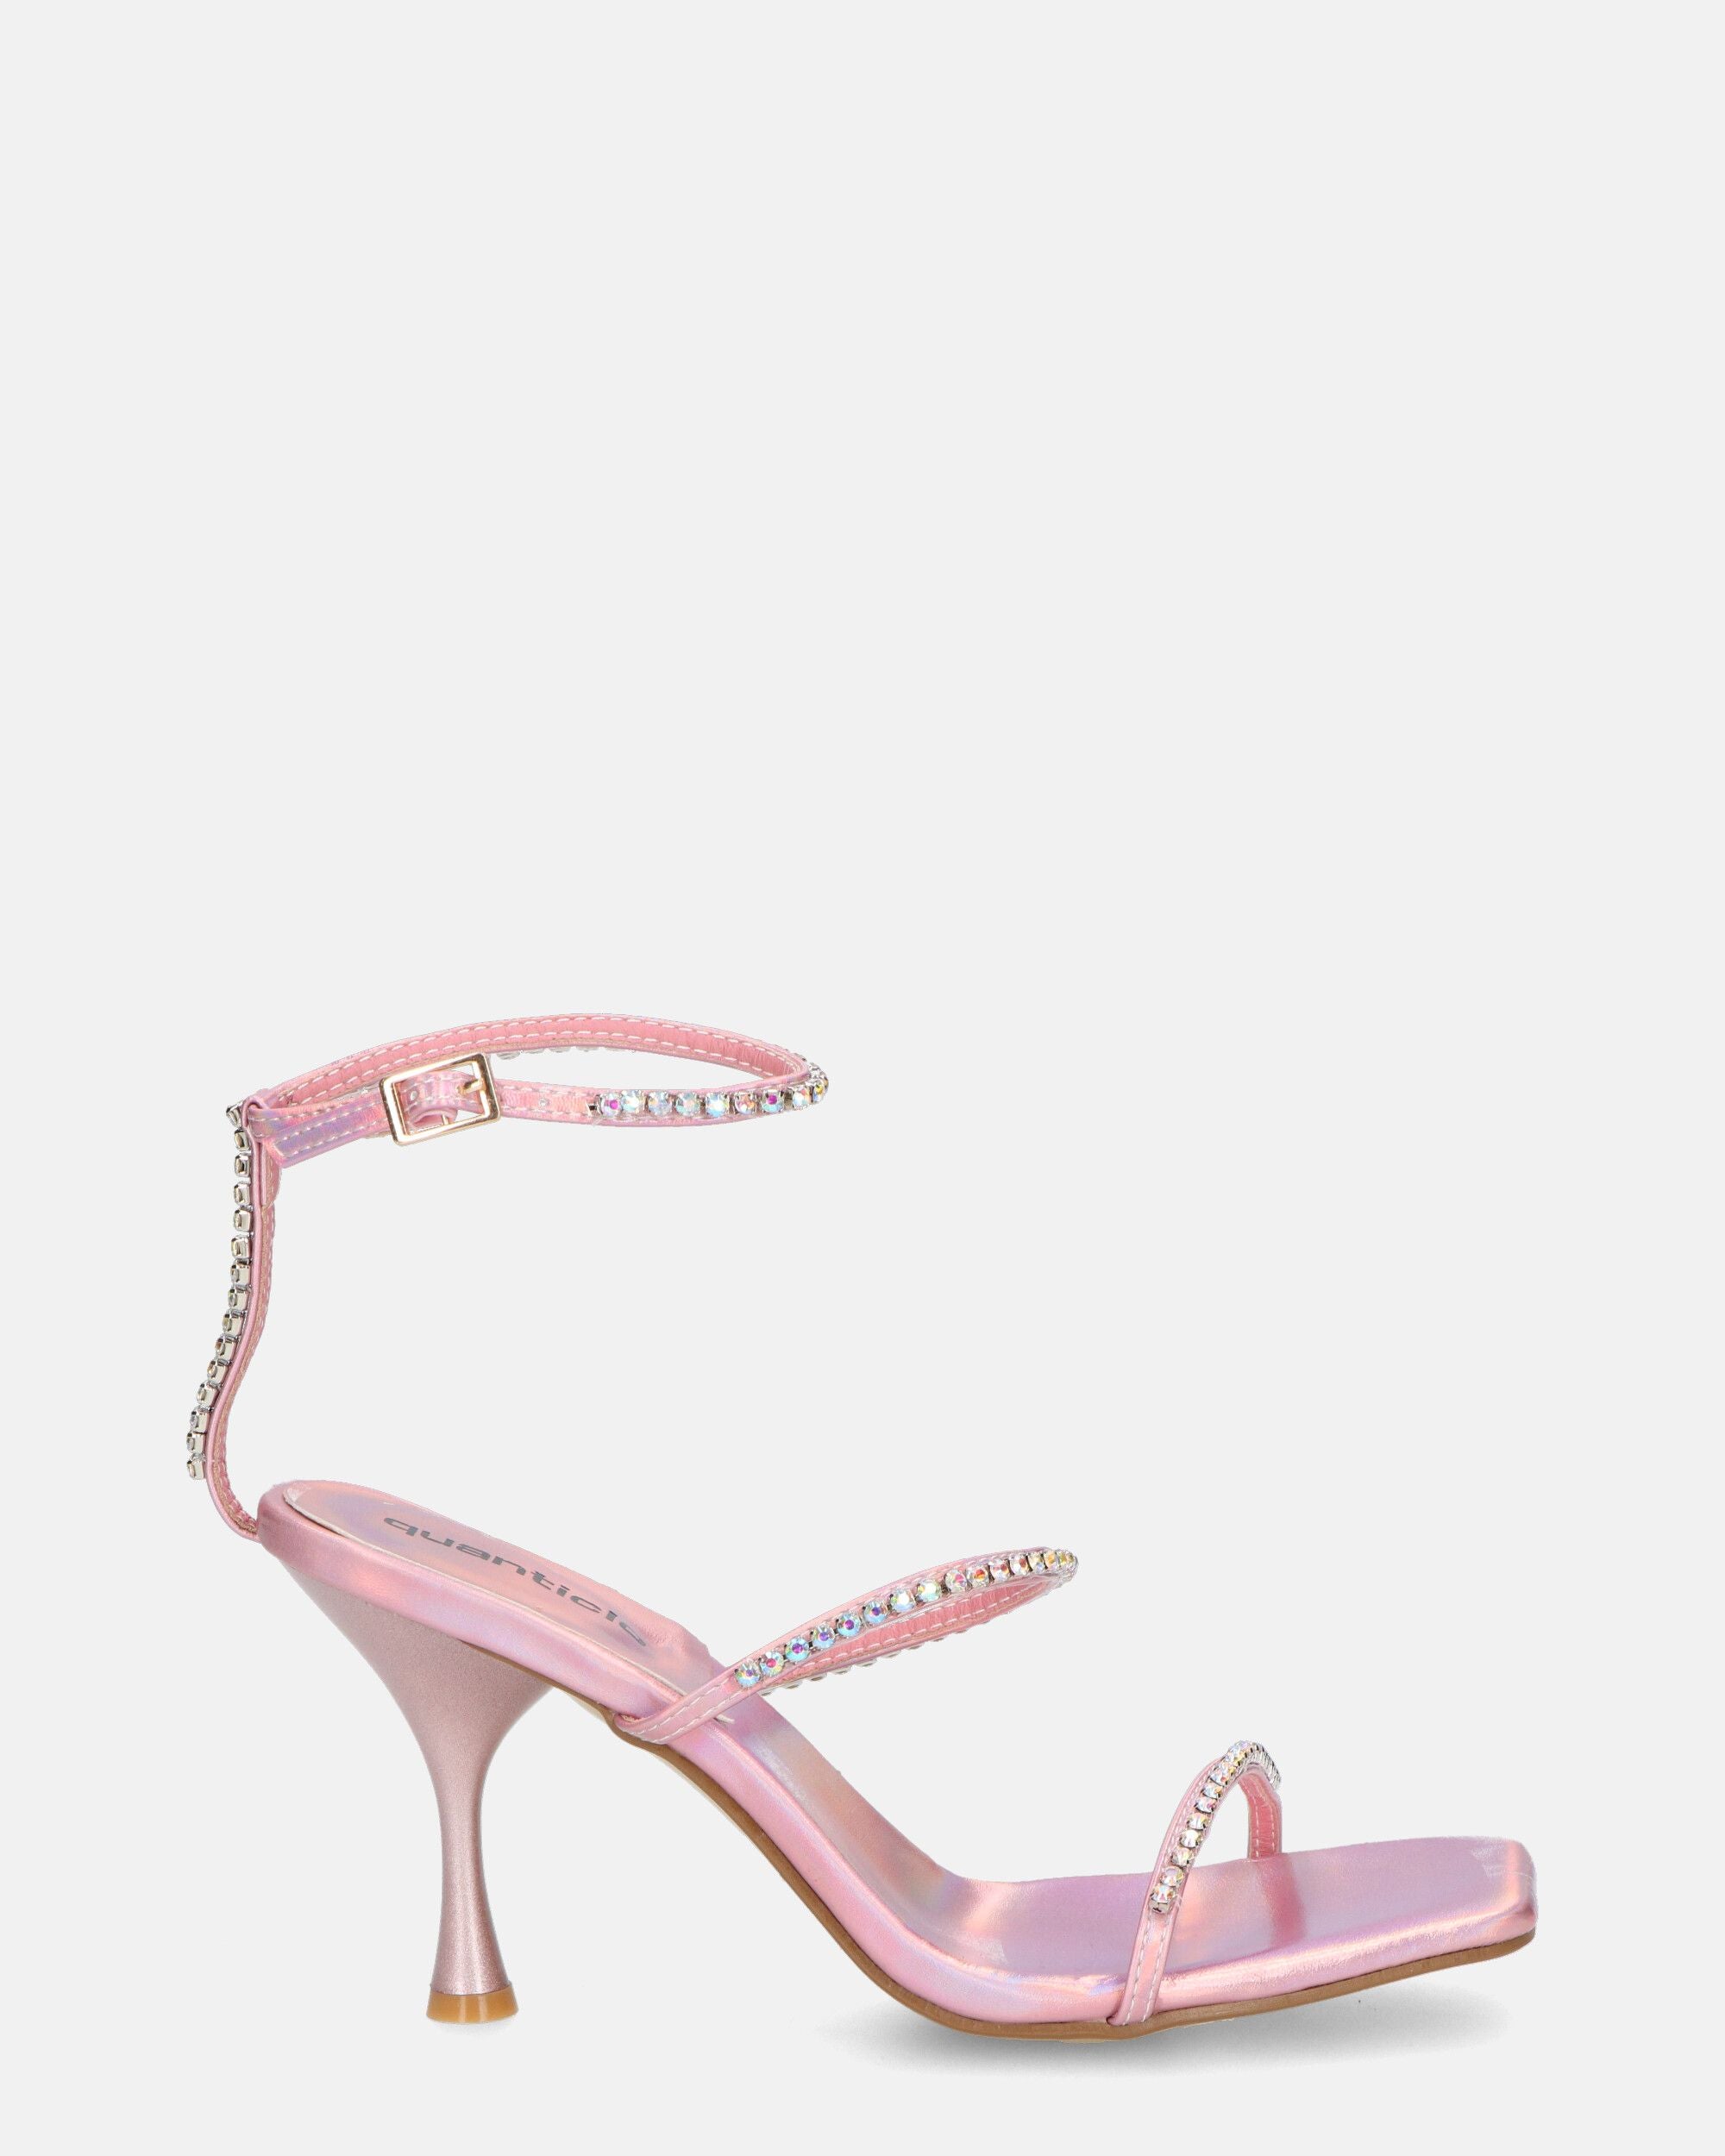 RAHA - glassy pink sandals with gems